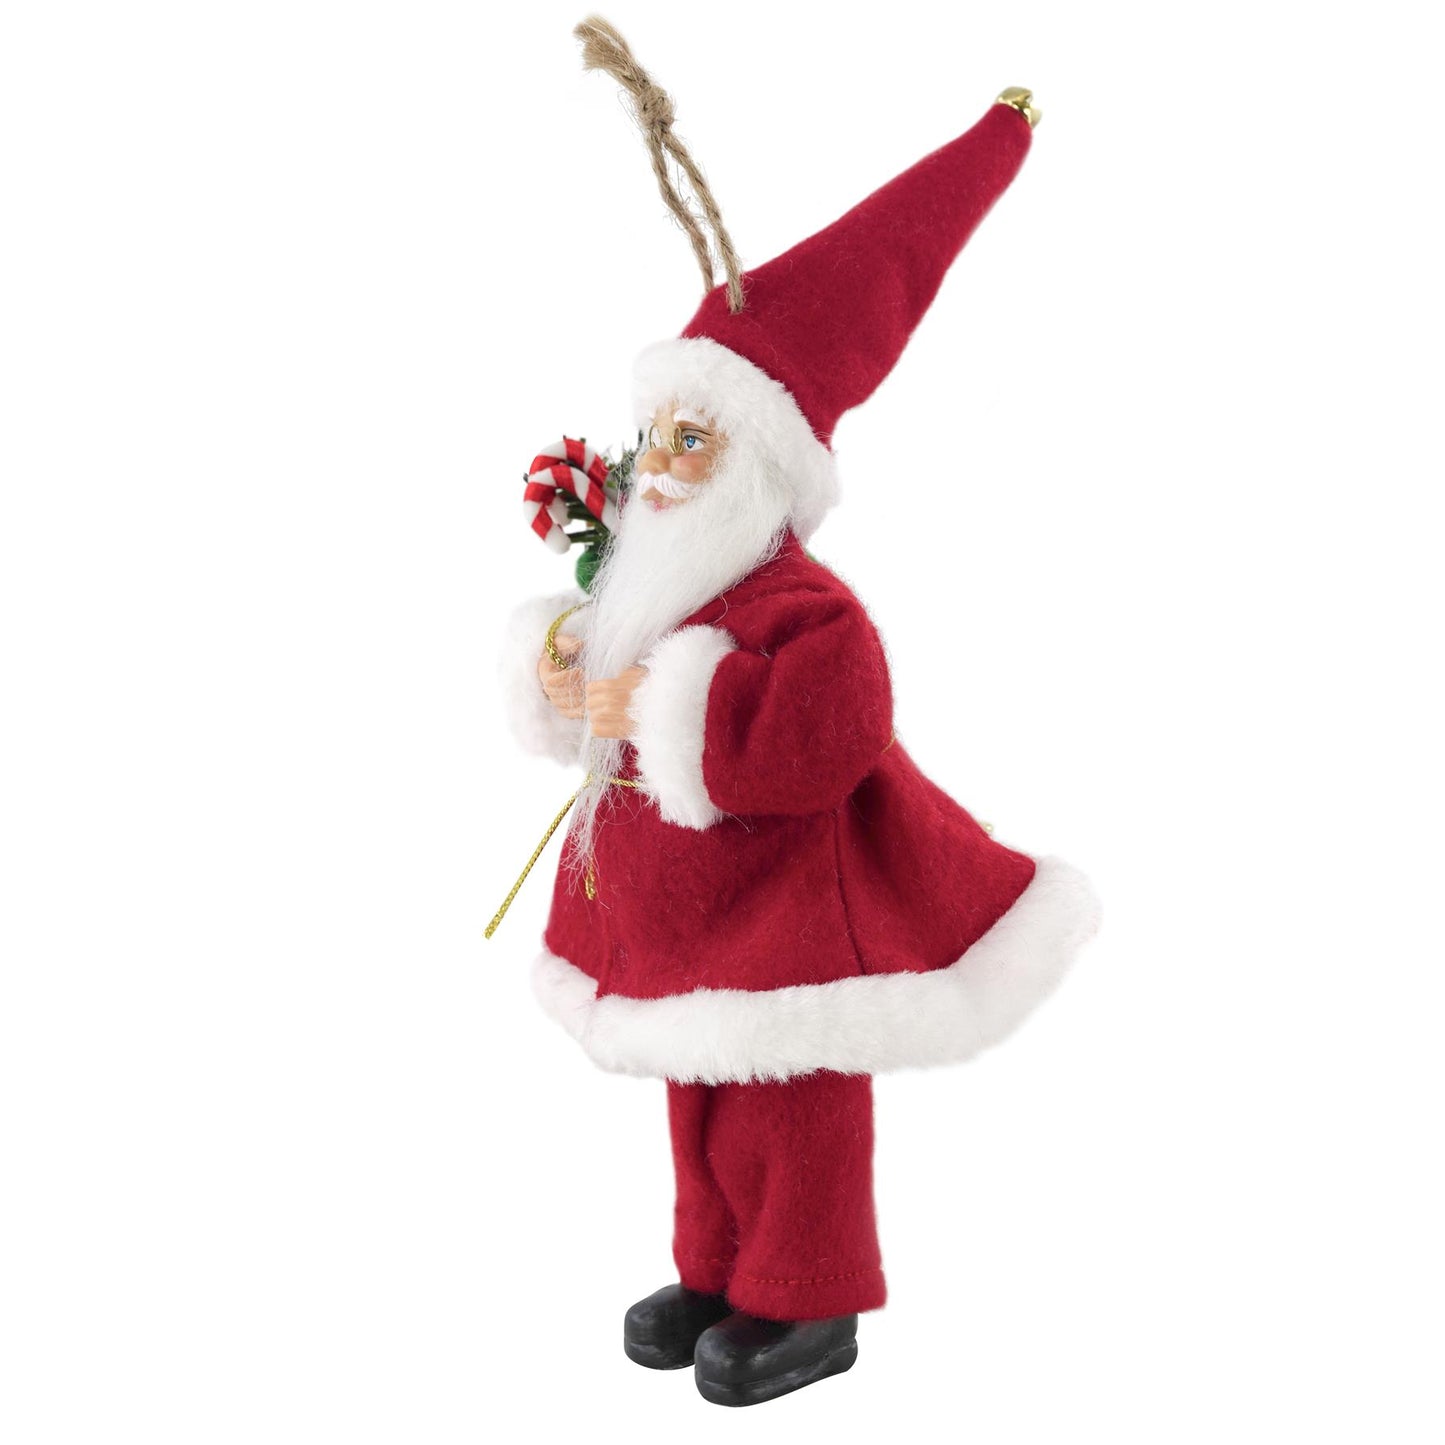 Standing Small Santa Claus by The Magic Toy Shop - UKBuyZone